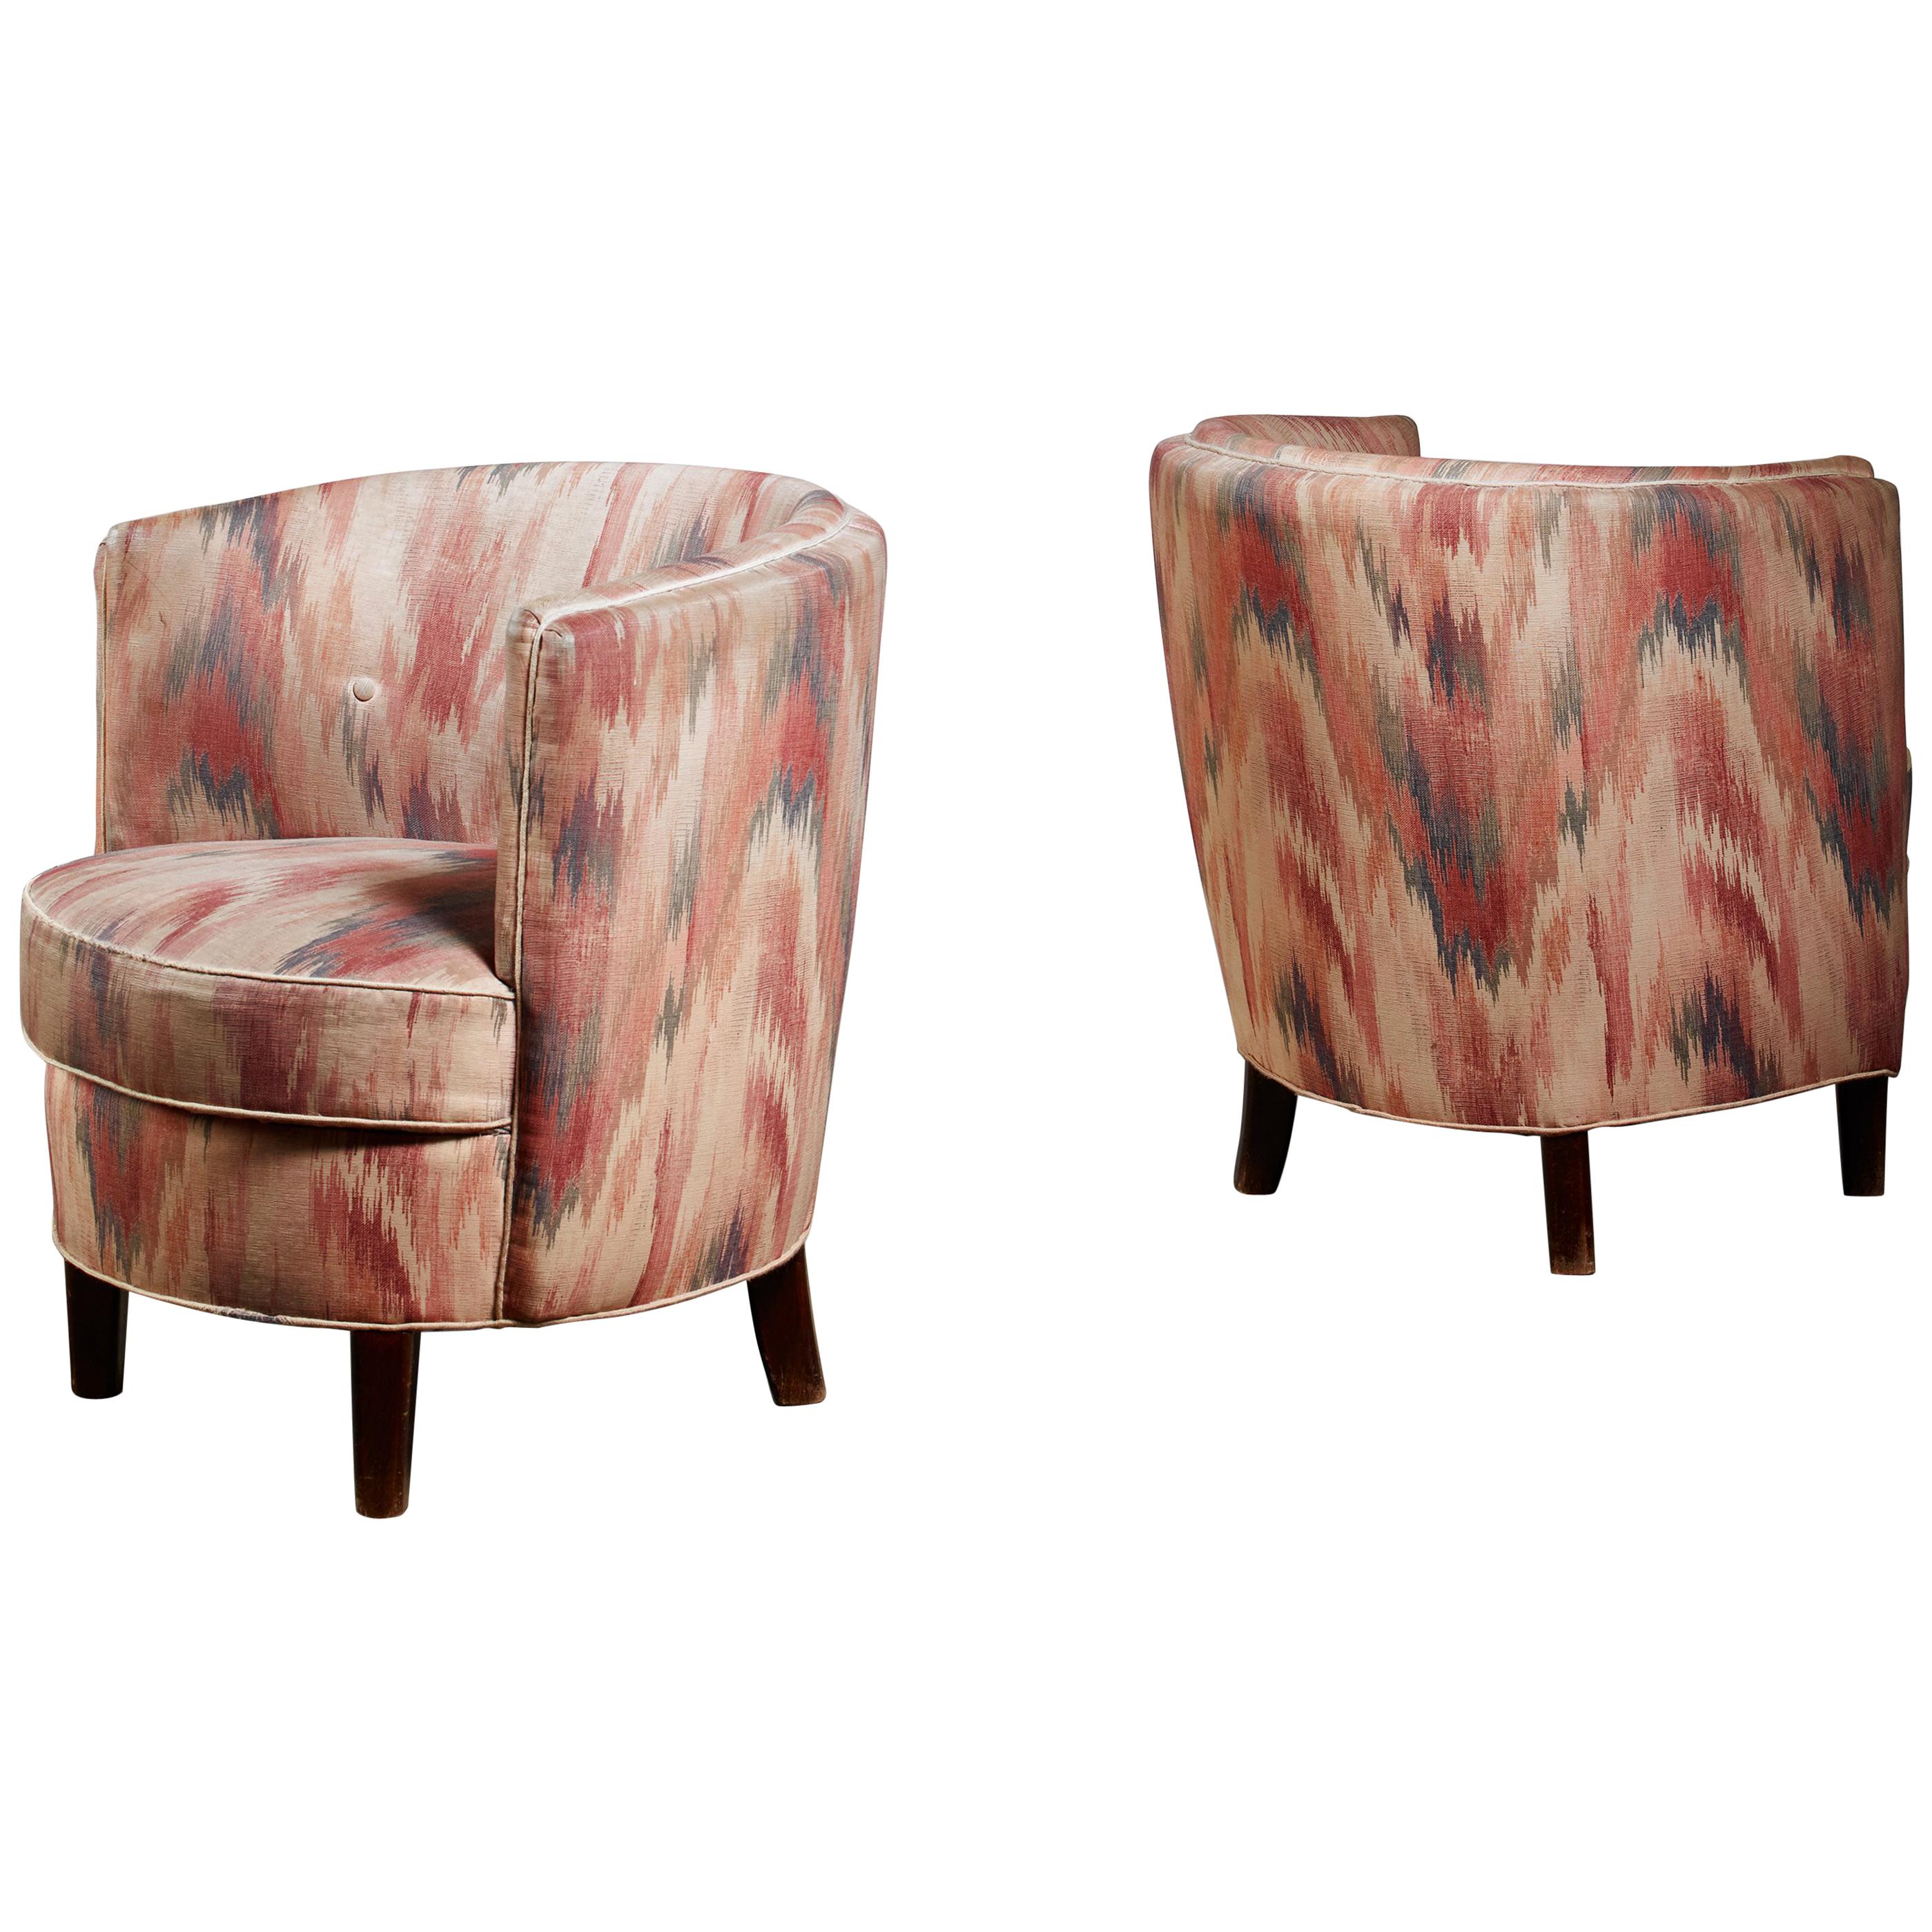 Pair of Danish Club Chairs, 1940s For Sale